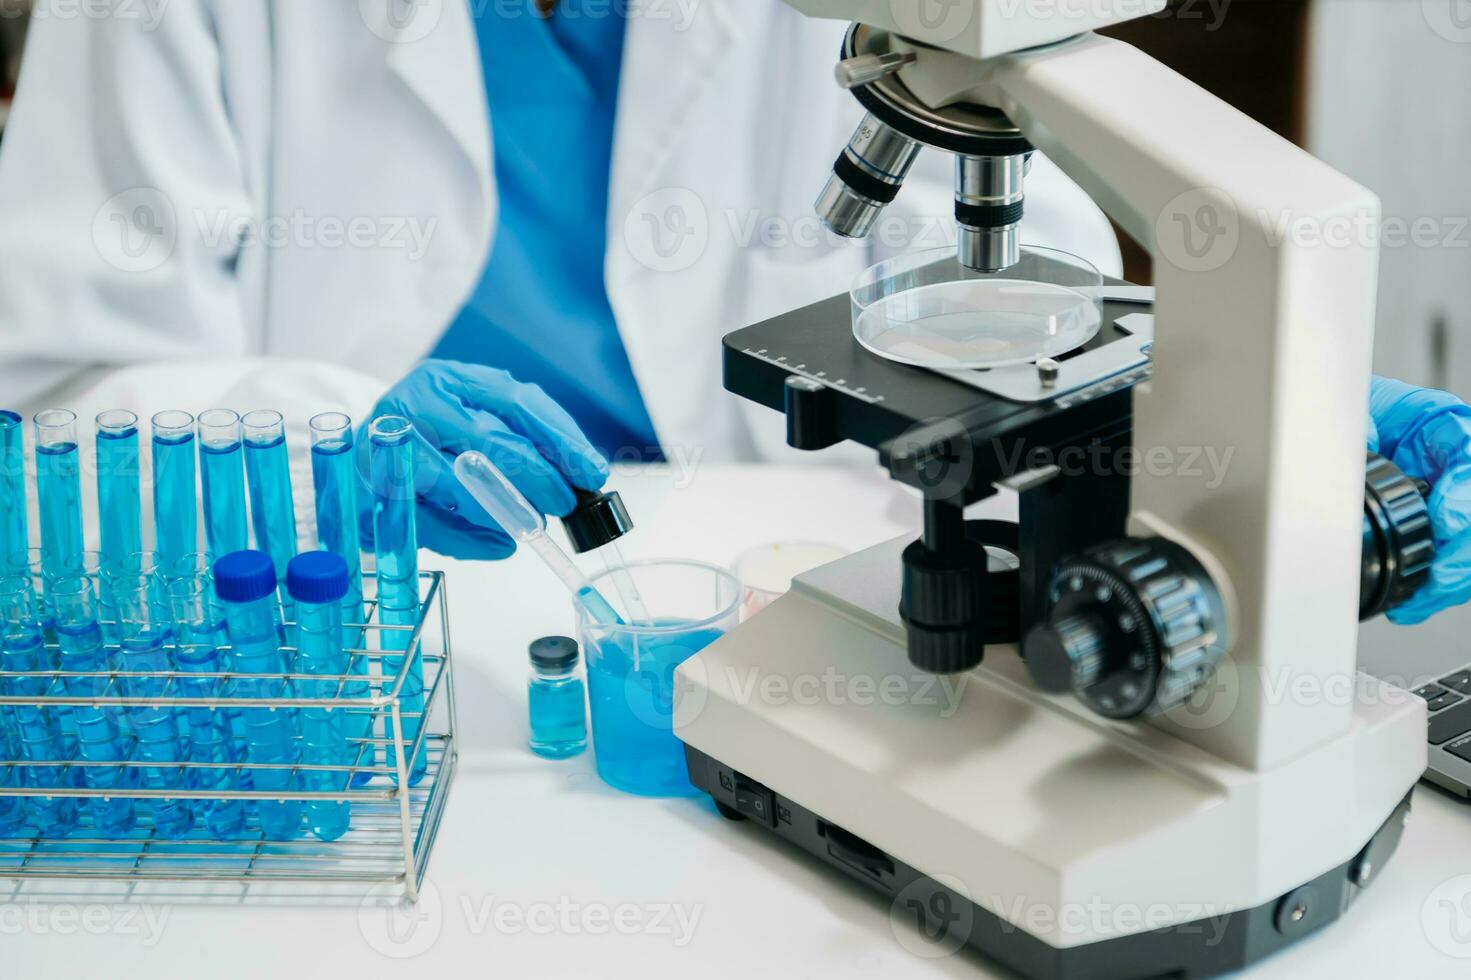 Modern medical research laboratory. female scientist working with micro pipettes analyzing biochemical samples, advanced science chemical laboratory photo